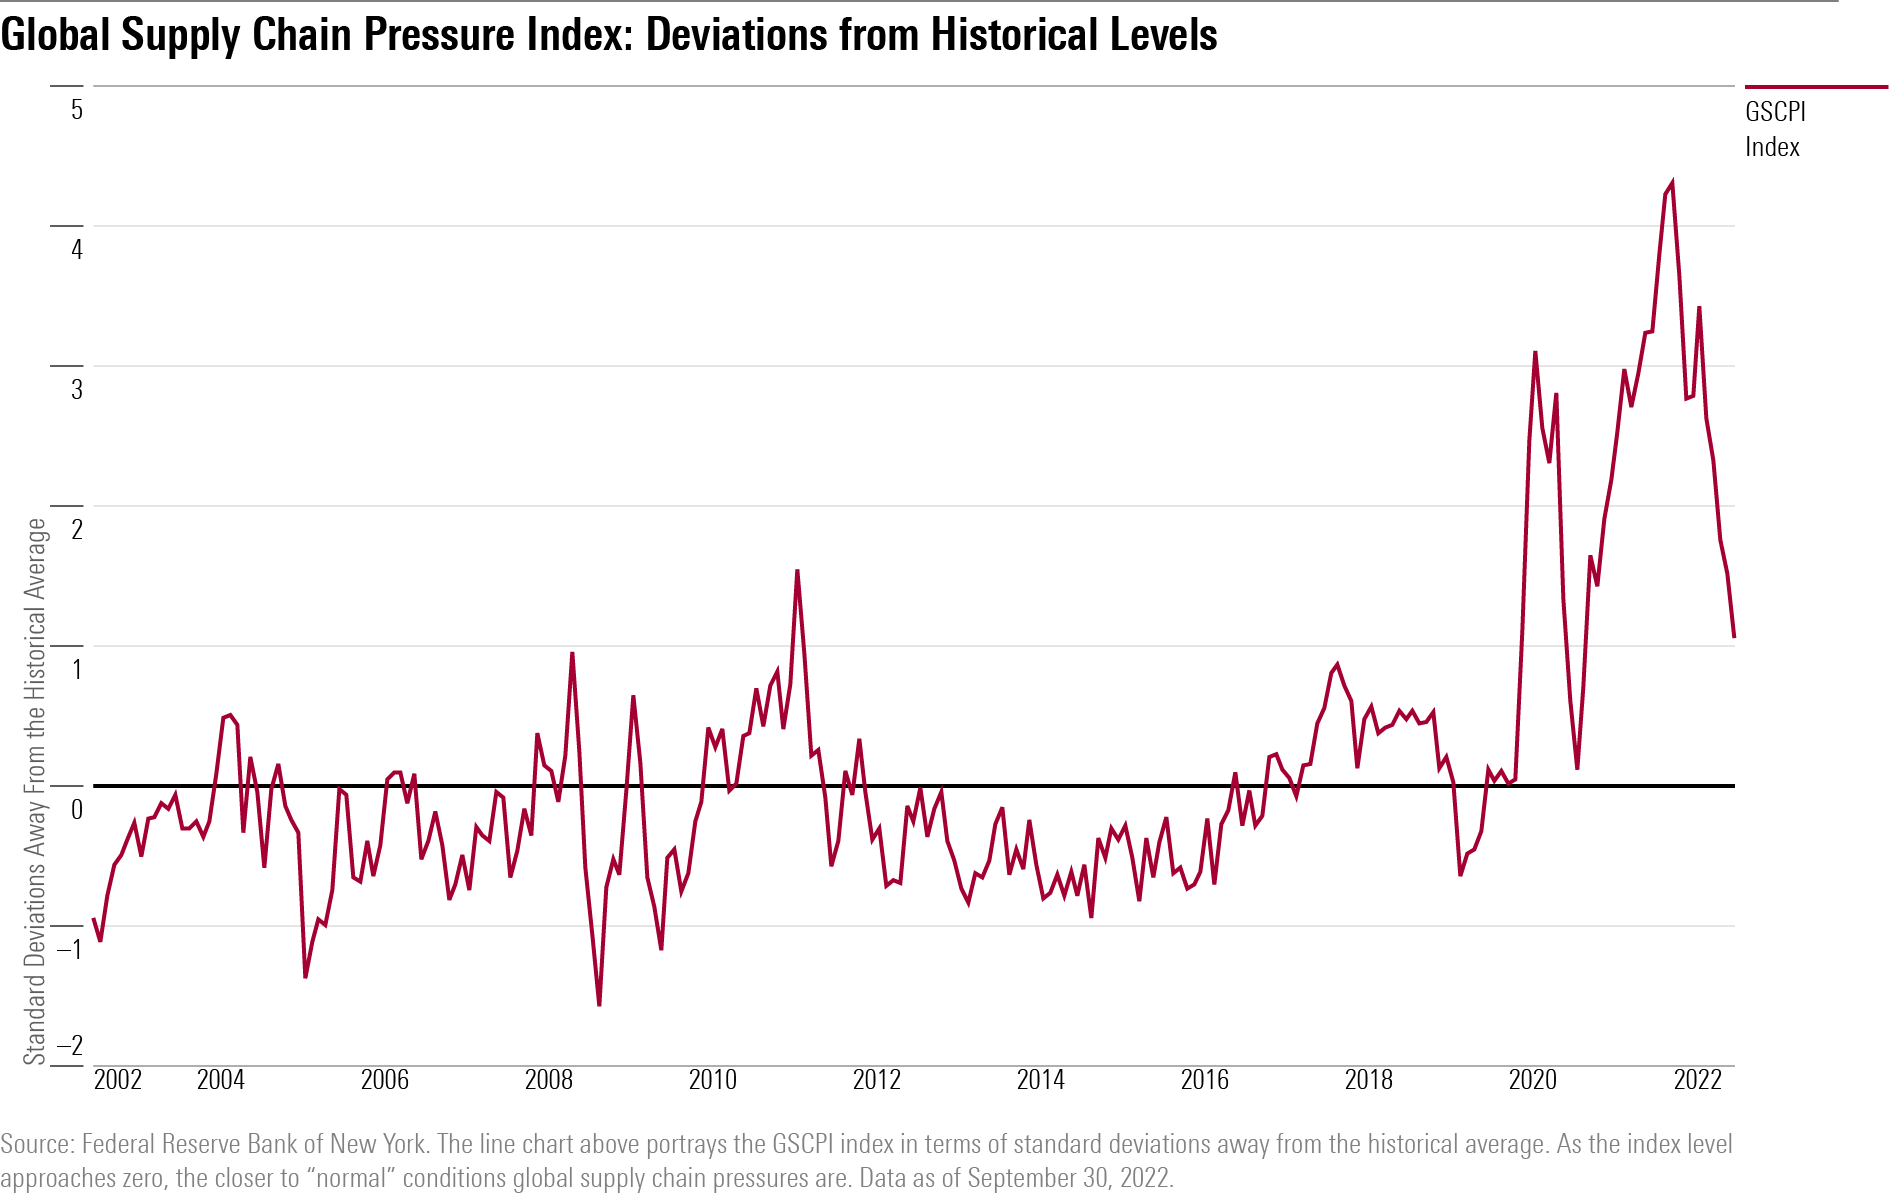 A line chart showing the Global Supply Chain Pressure Index over the last 20 years in terms of standard deviations away from the average.